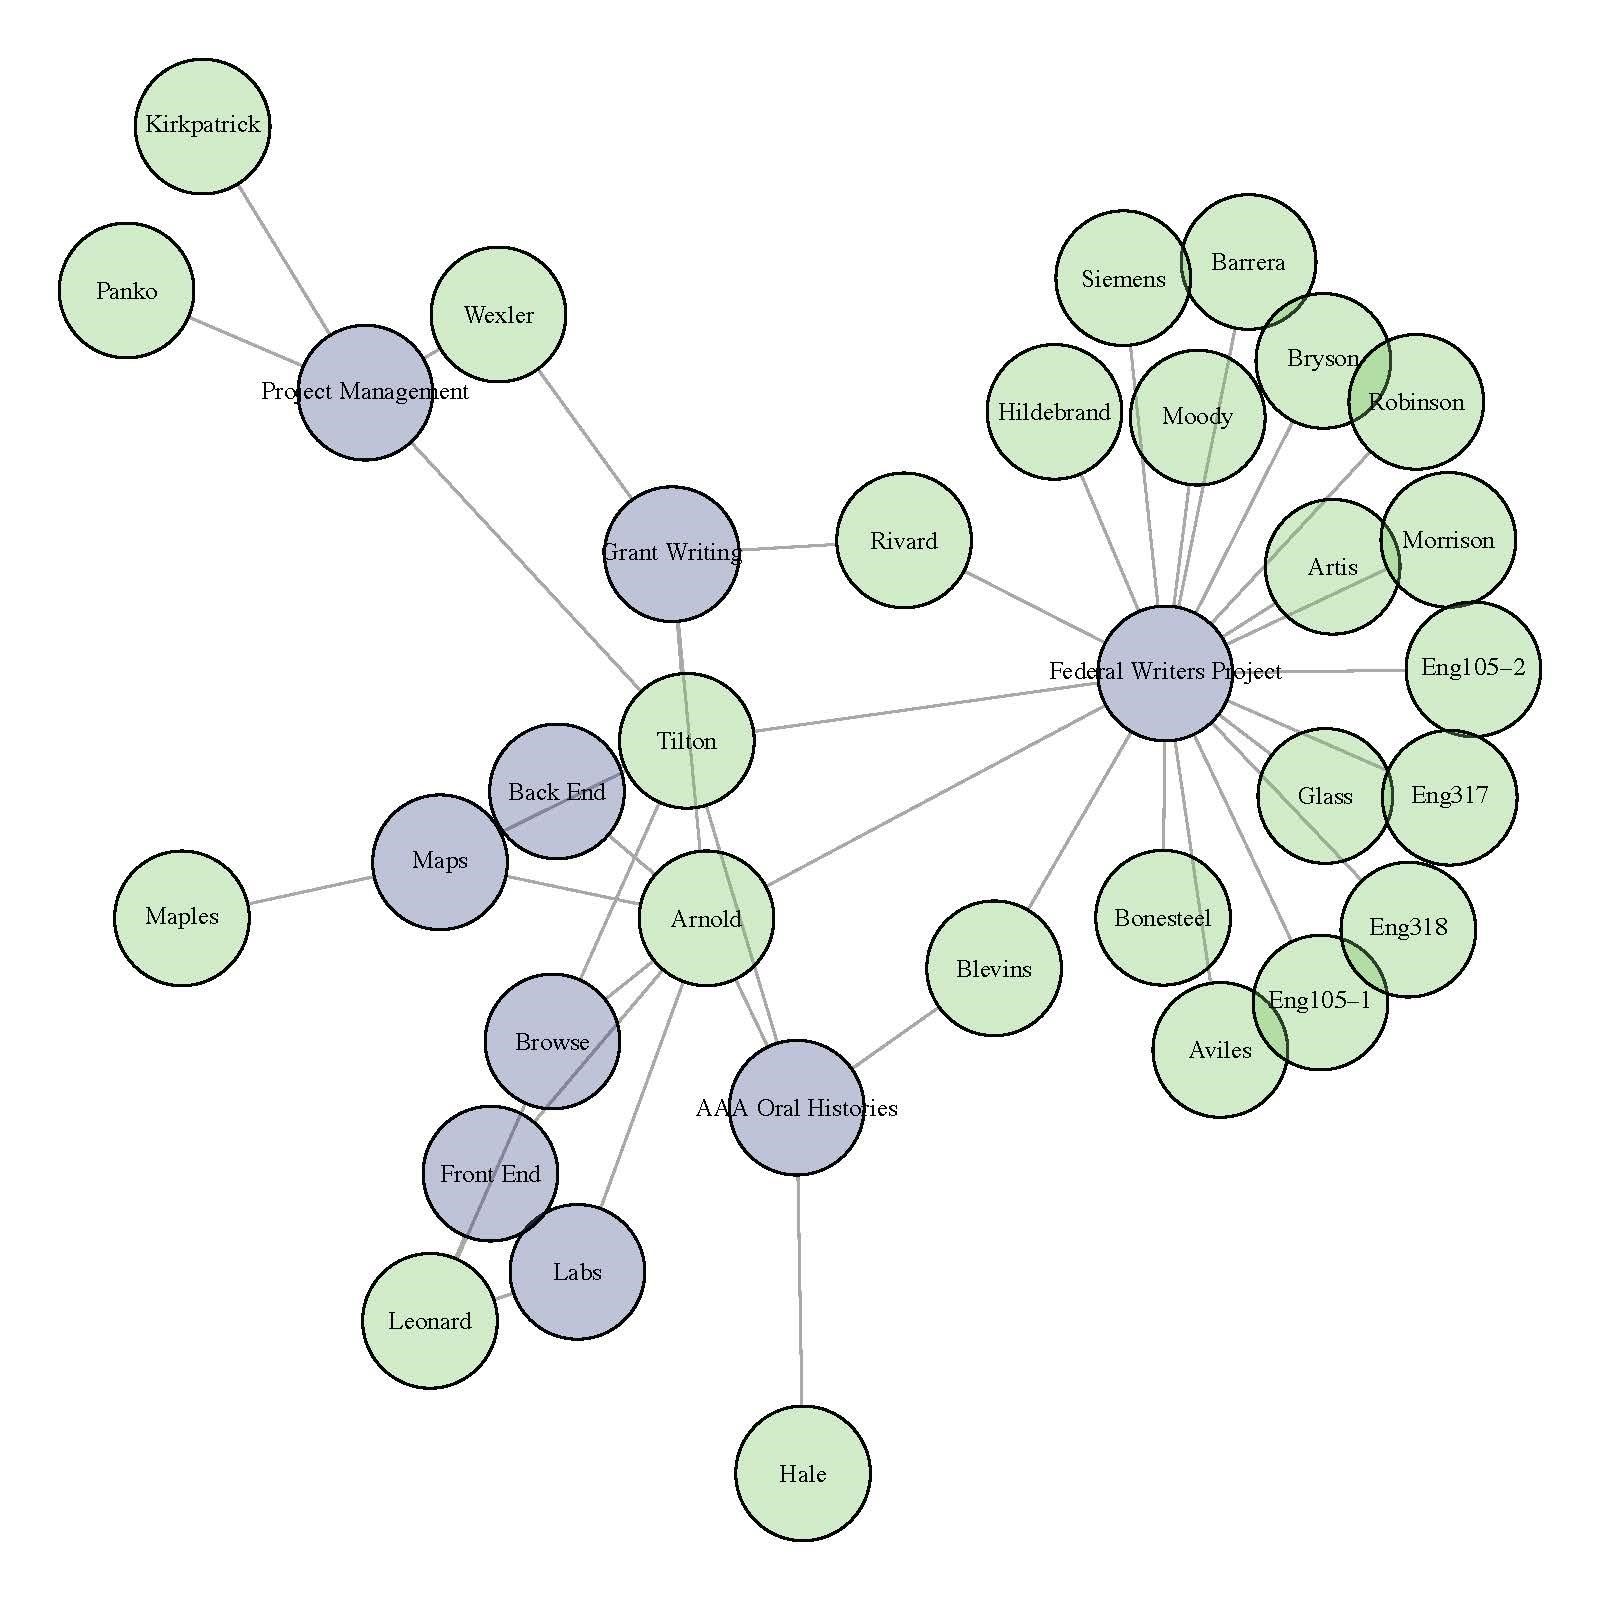 A network visualization of the individuals who worked on the project.
                        Gray nodes indicate components of the project; green nodes indicate
                        individual workers.